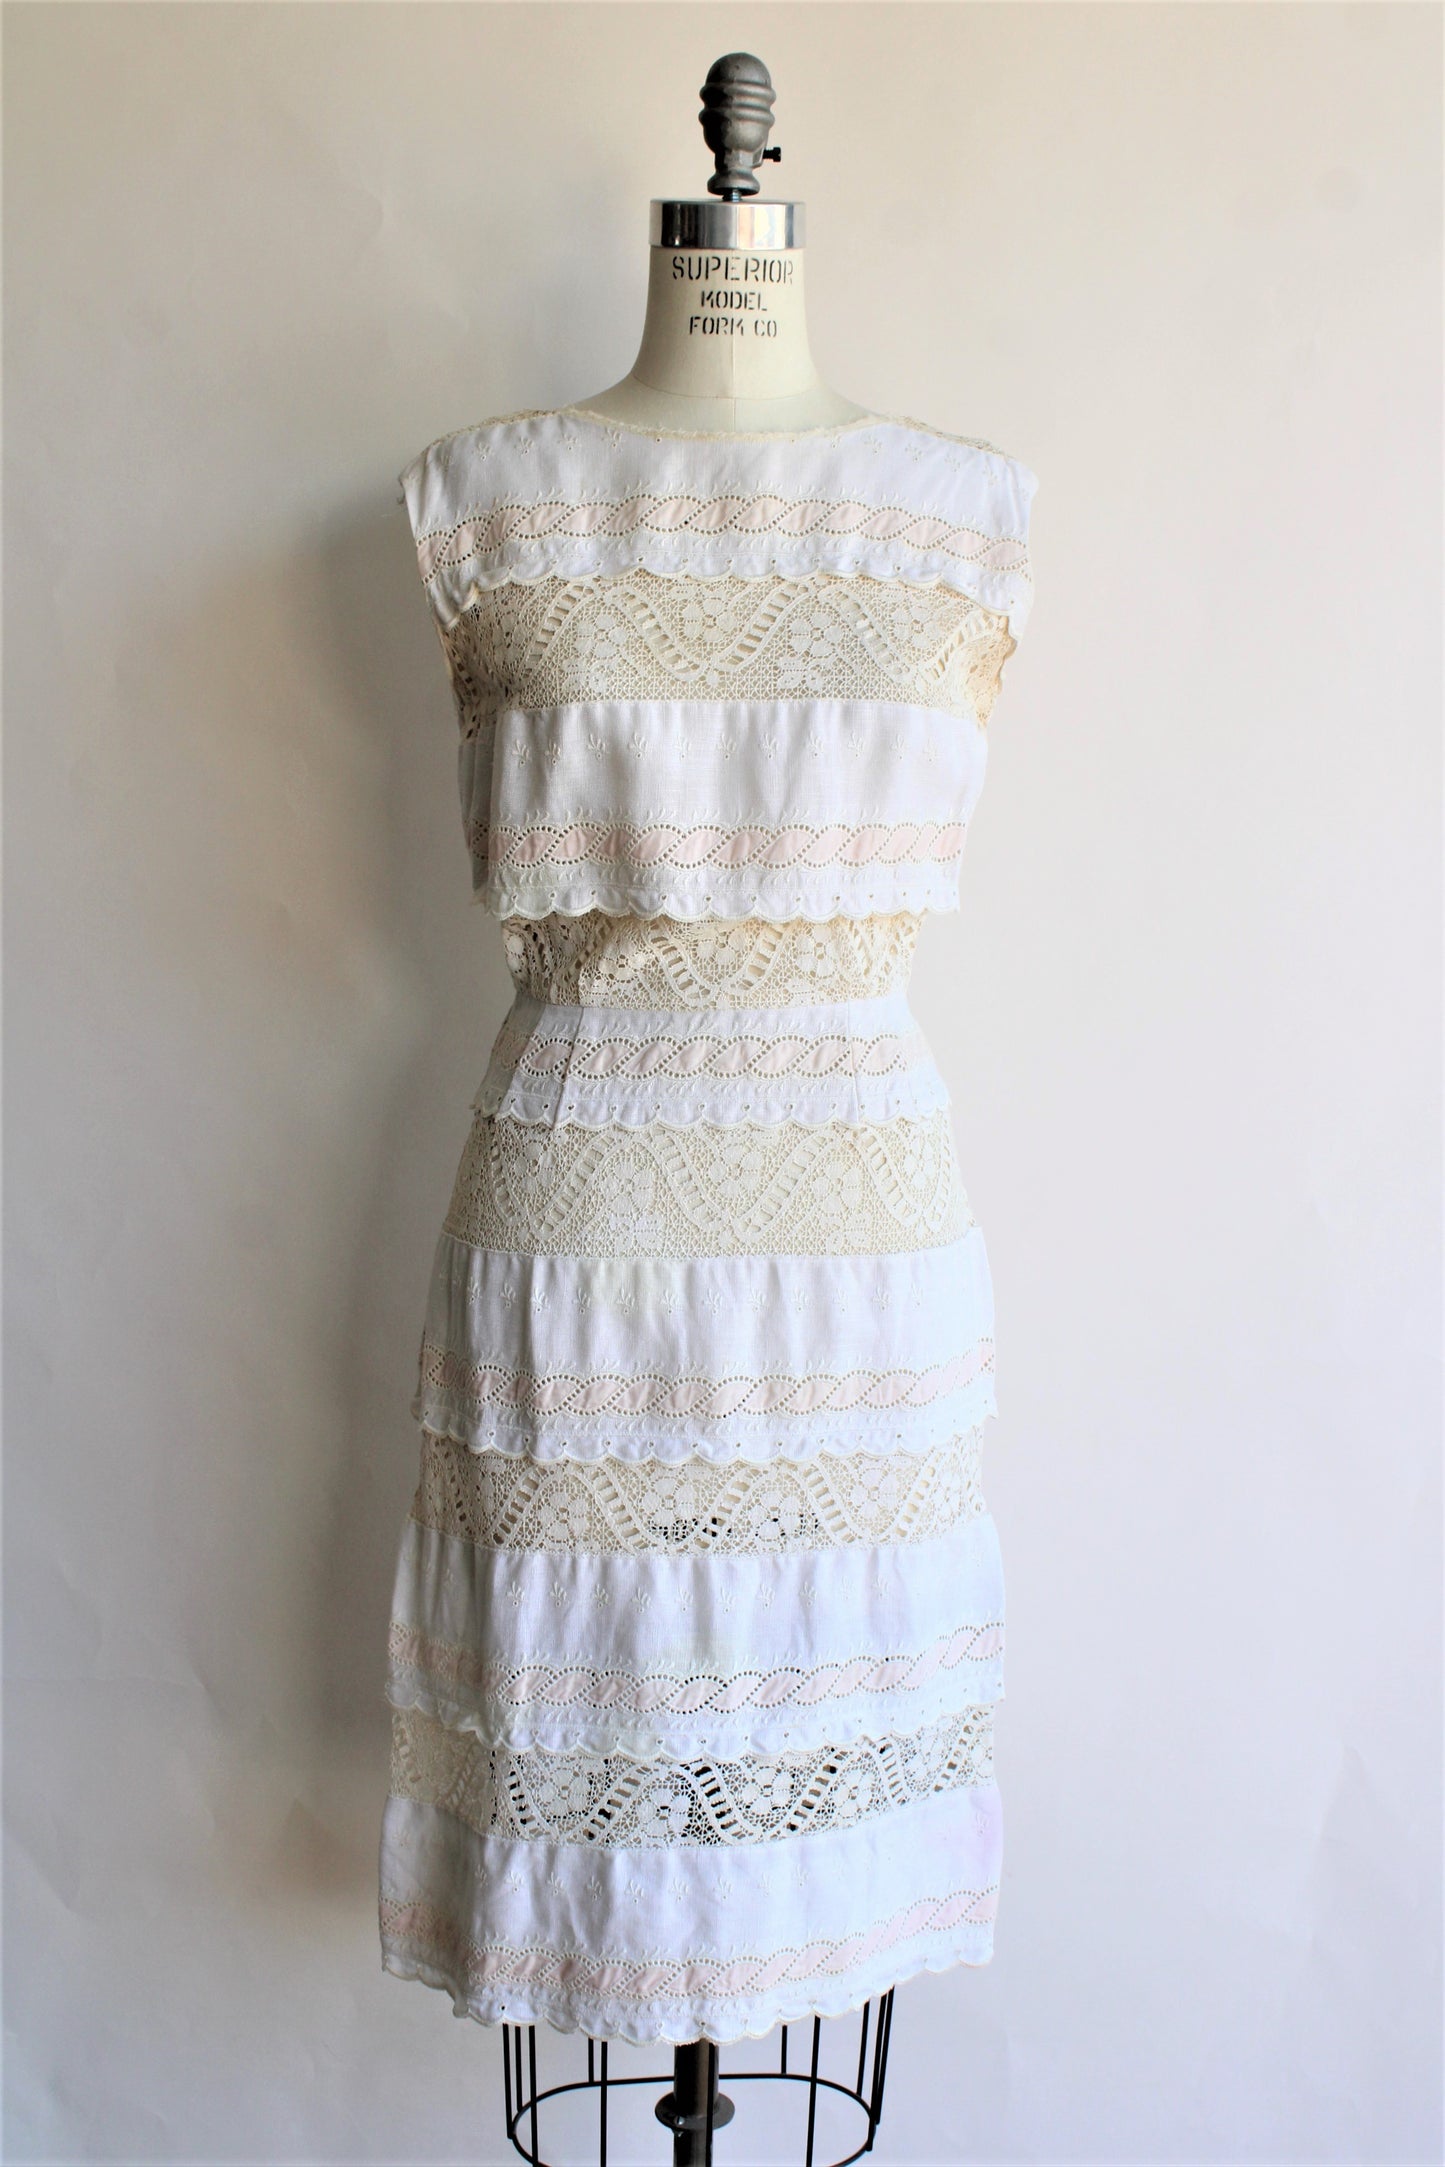 Vintage 1960s Linen and Lace Dress from Saks Fifth Avenue